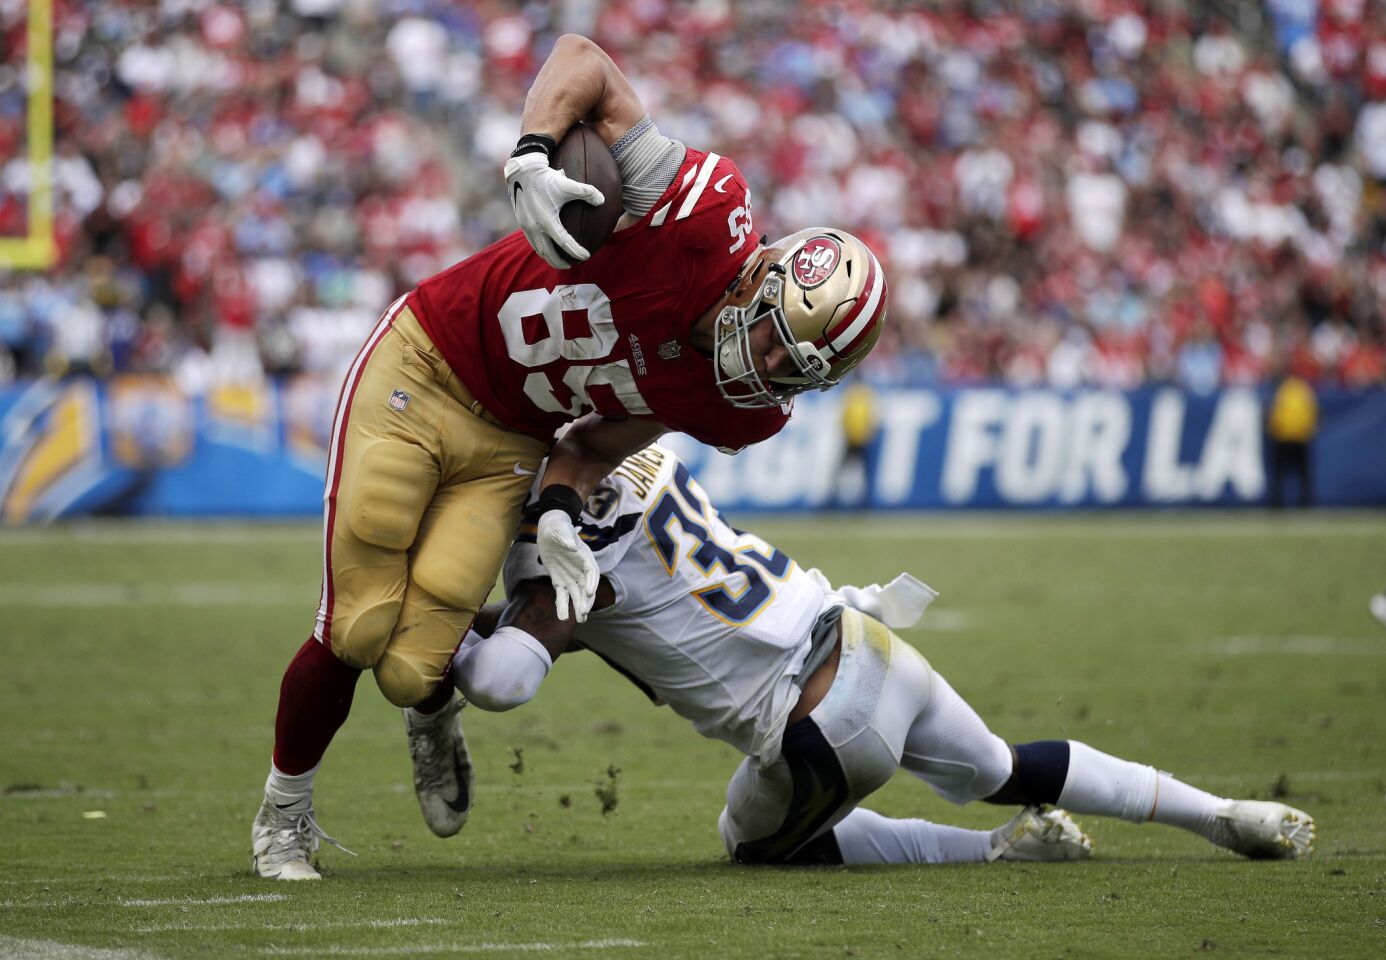 San Francisco 49ers tight end George Kittle, left, is tackled by Los Angeles Chargers defensive back Derwin James during the first half of an NFL football game, Sunday, Sept. 30, 2018, in Carson, Calif.